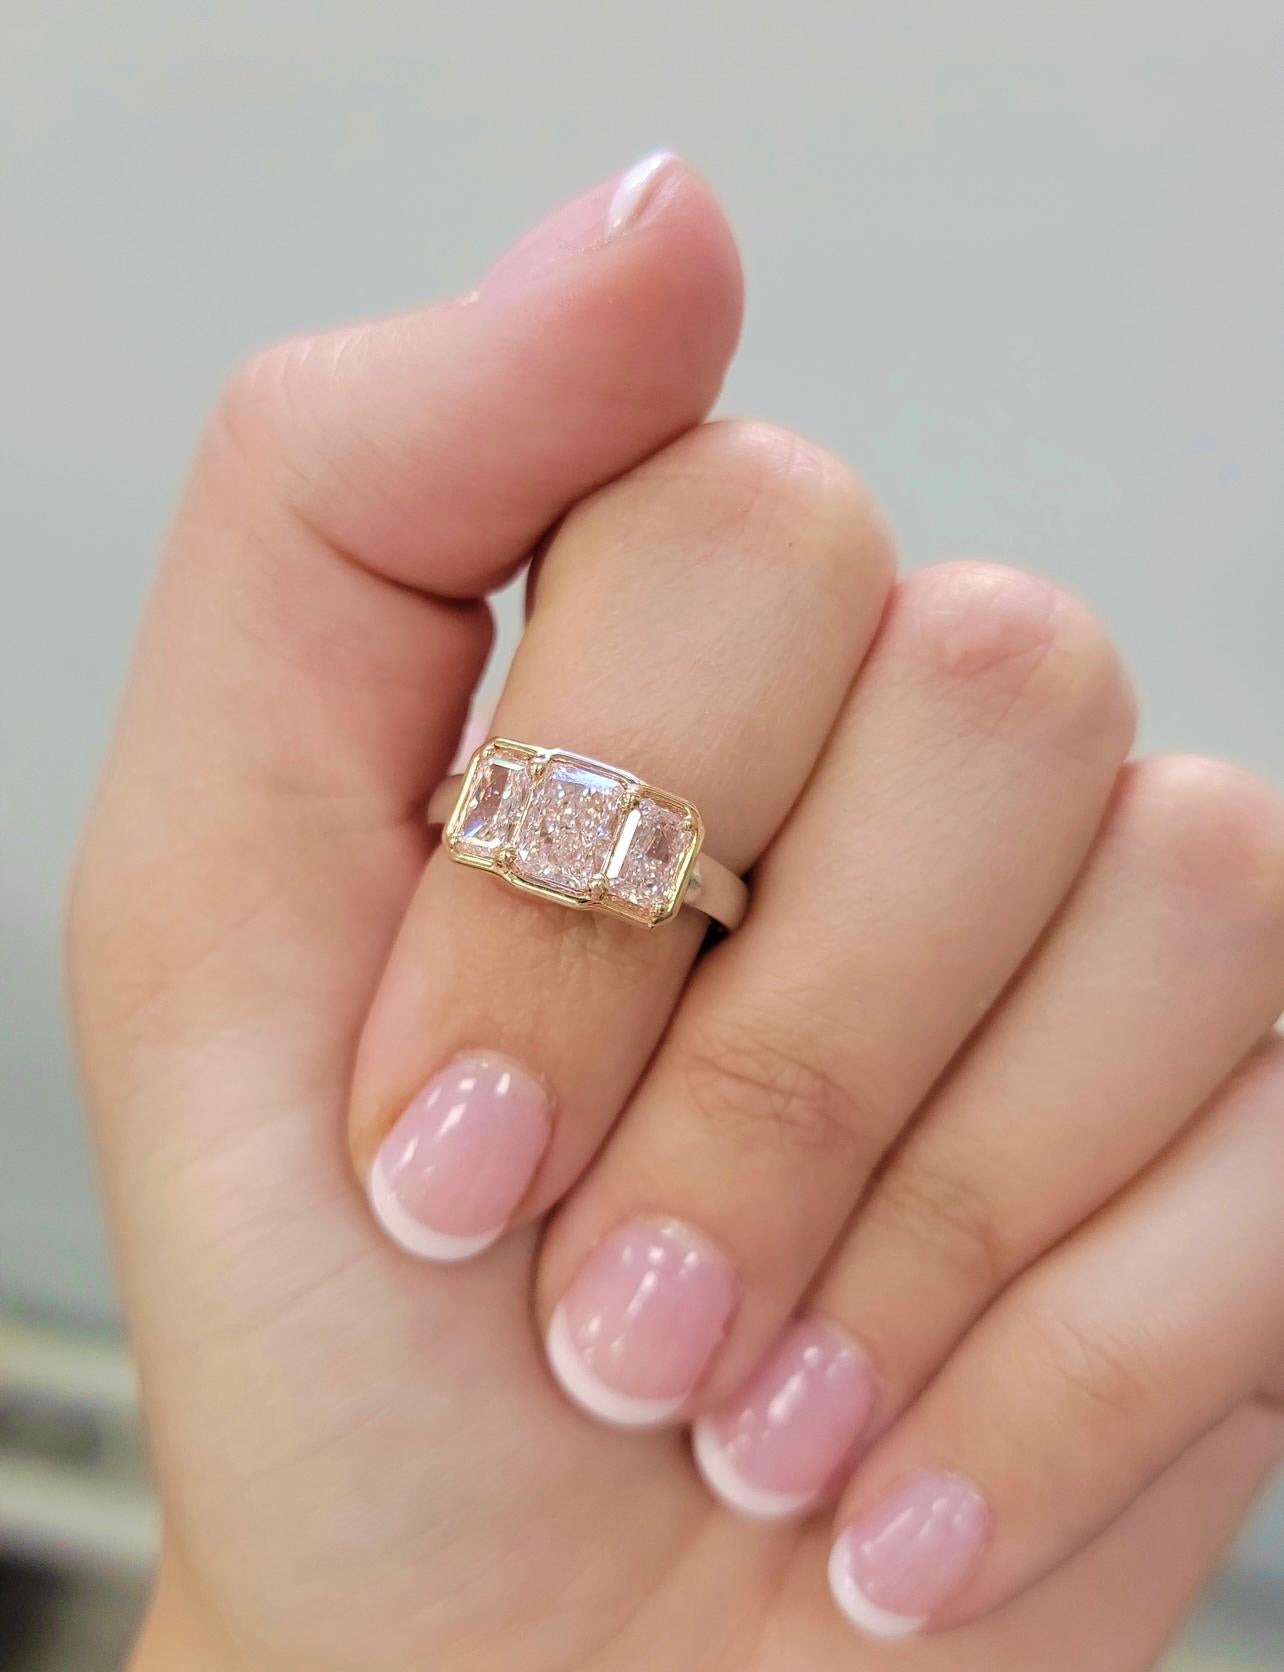 Unique and beautiful three stone ring with a 1.09ct GIA Light Pink VVS2 Long Radiant and a matched pair of 0.51ct GIA Light Pink Flawless and 0.56ct GIA Very Light Pink VVS1 elongated radiant cuts. 

1.09ct Light Pink VVS2 Diamond
0.51ct Light Pink